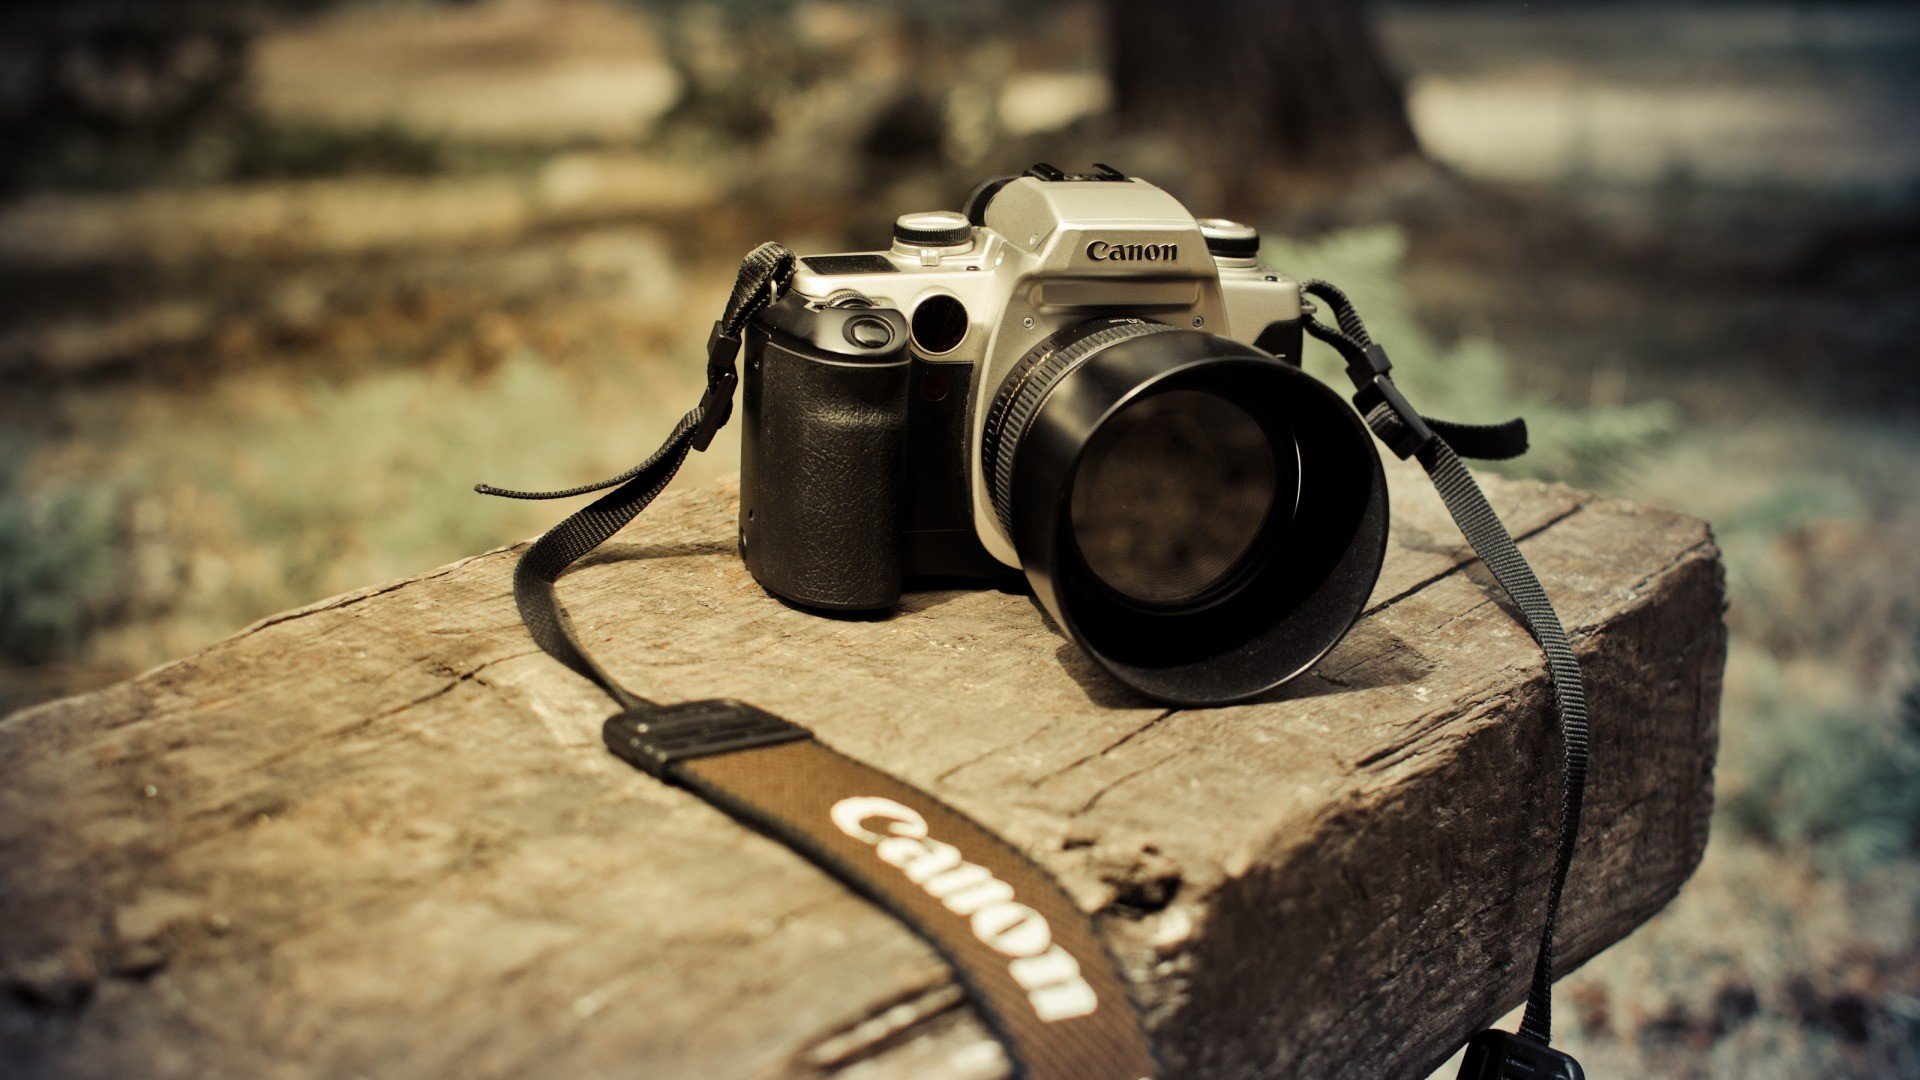 Wallpaper Black and Silver Canon Dslr Camera on Brown Rock, Background -  Download Free Image